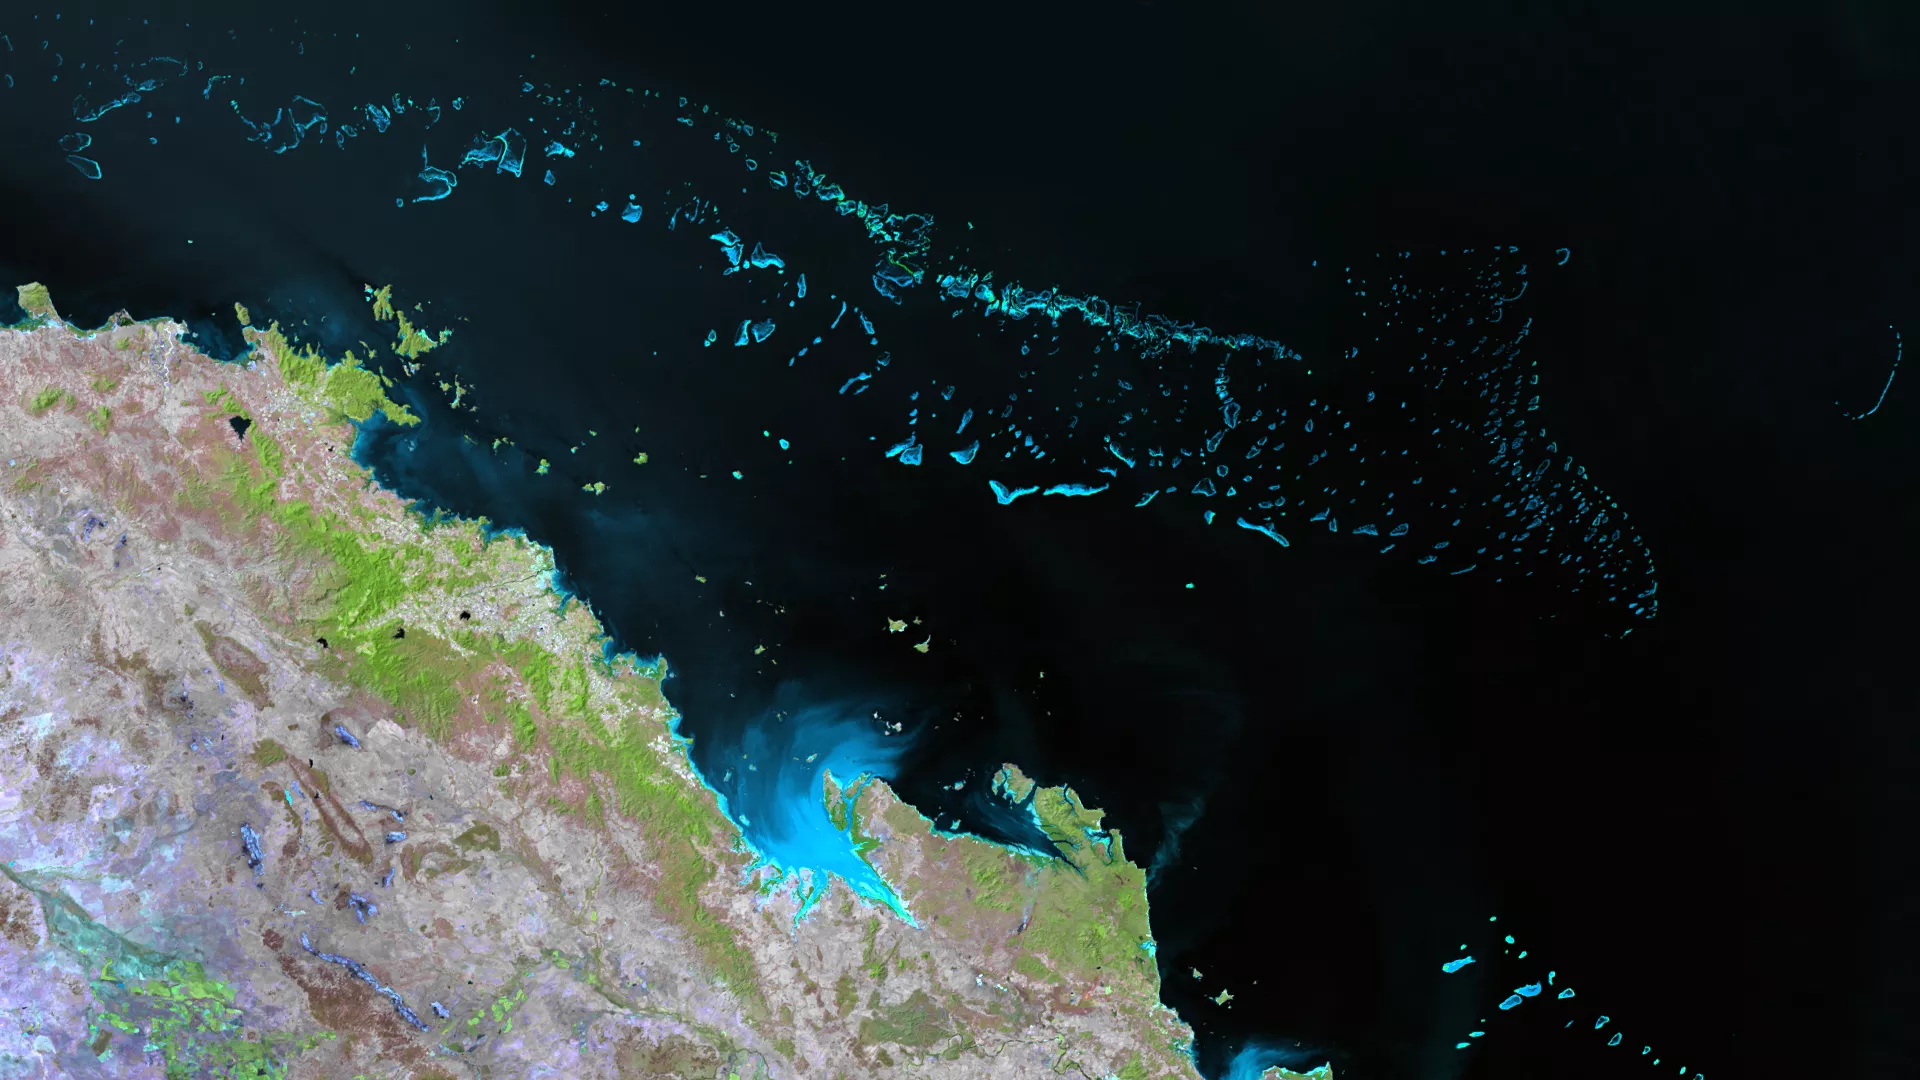 Image of the Great Barrier Reef